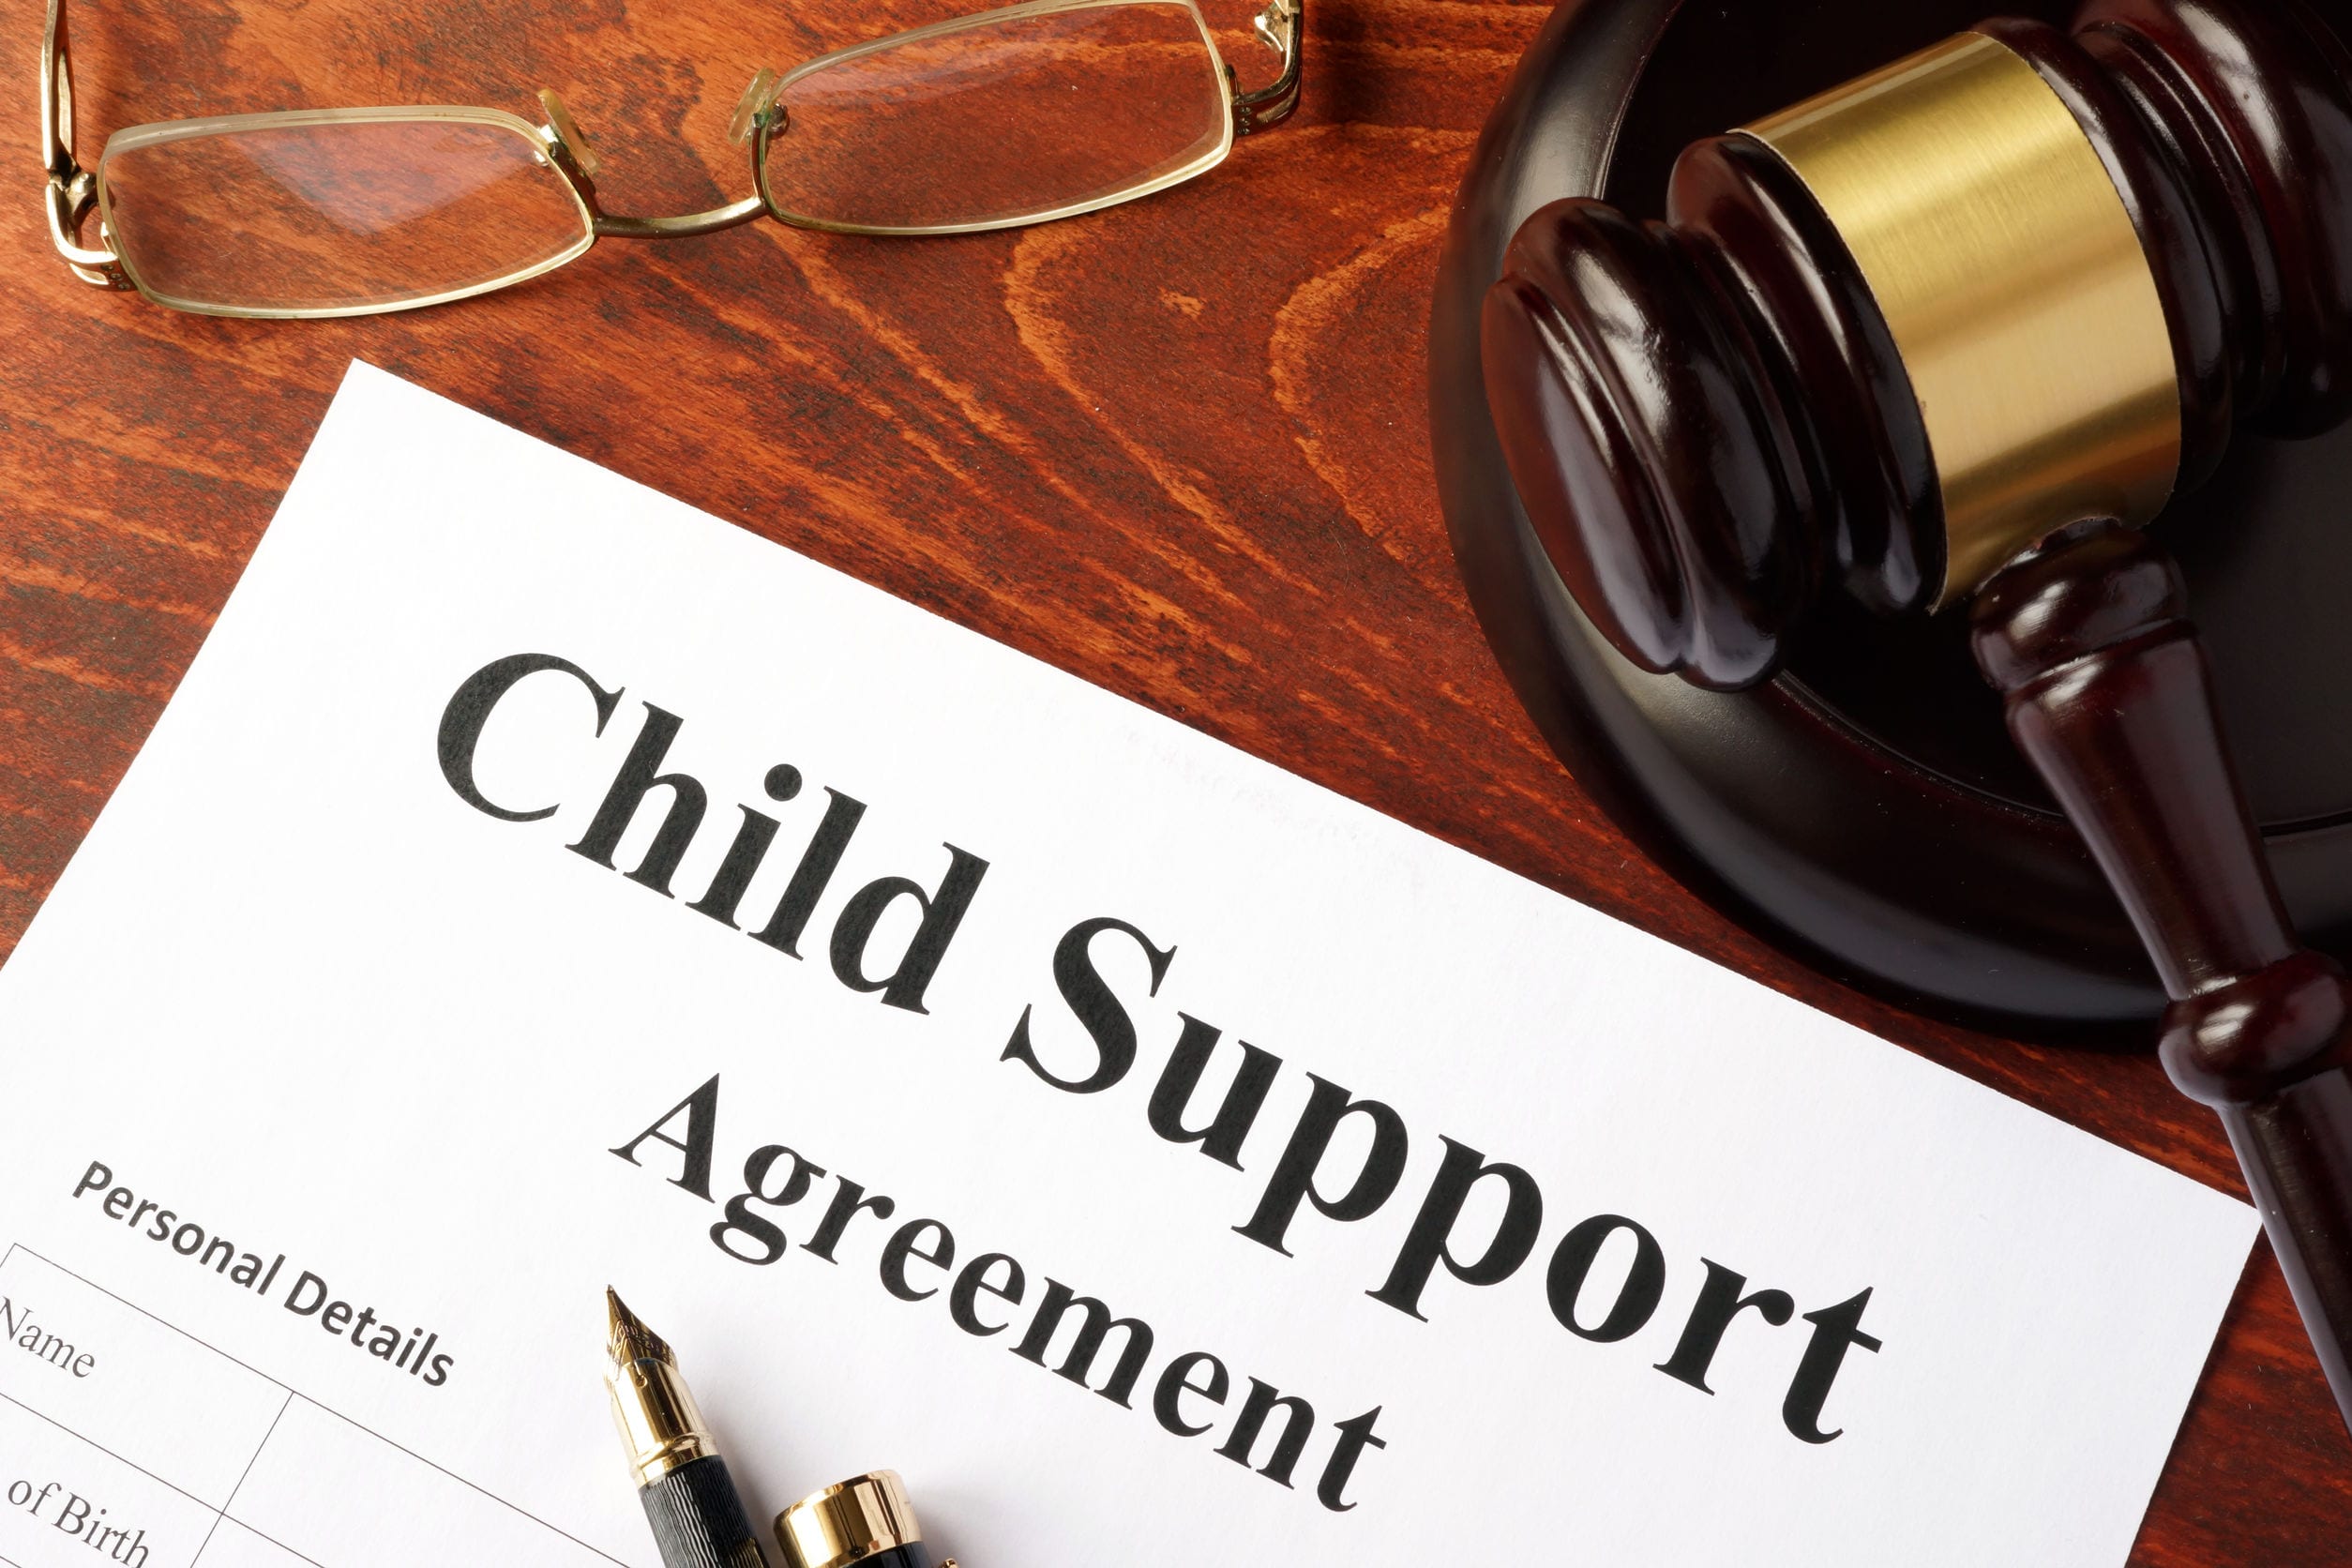 Skip the Child Support in MN, Risk Federal Criminal ProsecutionSkip the Child Support in MN, Risk Federal Criminal Prosecution